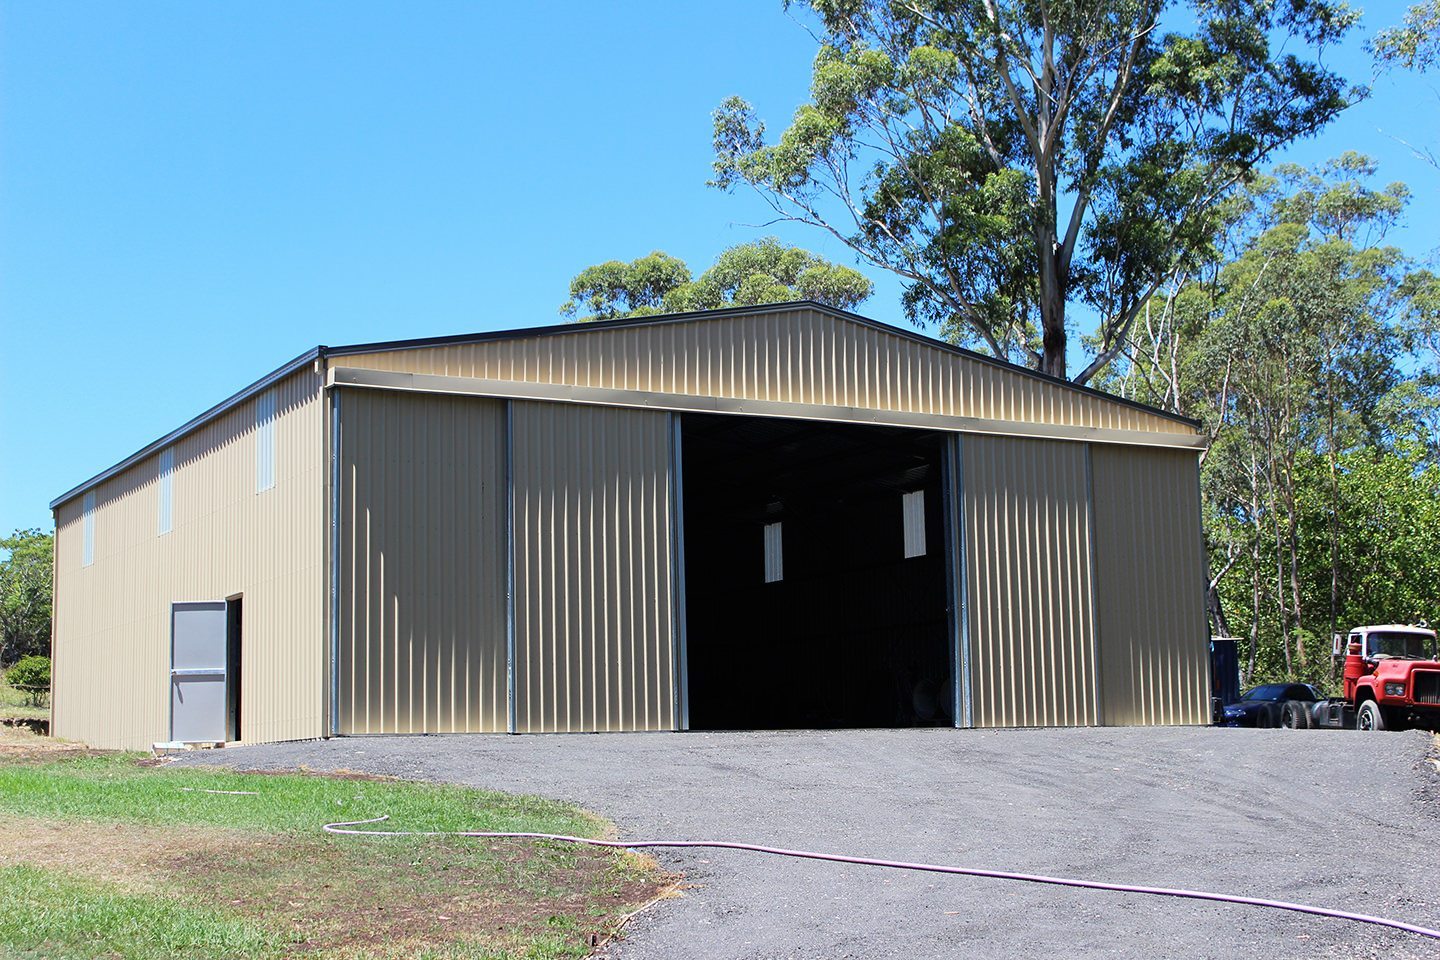 Machinery Sheds - Commercial Sheds for Sale - Commercial